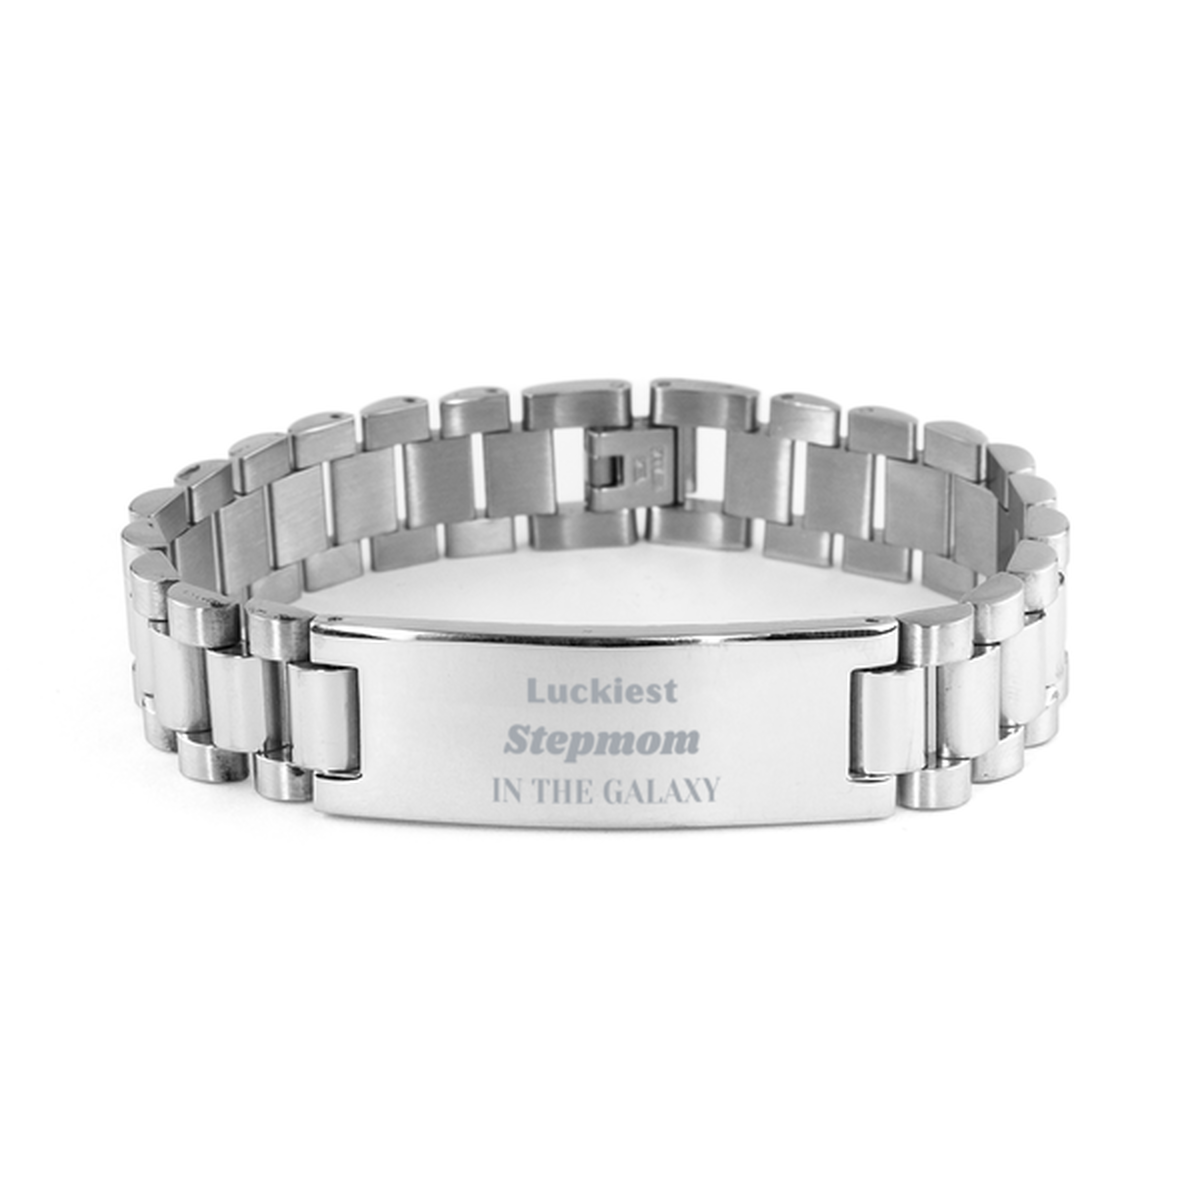 Luckiest Stepmom in the Galaxy, To My Stepmom Engraved Gifts, Christmas Stepmom Ladder Stainless Steel Bracelet Gifts, X-mas Birthday Unique Gifts For Stepmom Men Women